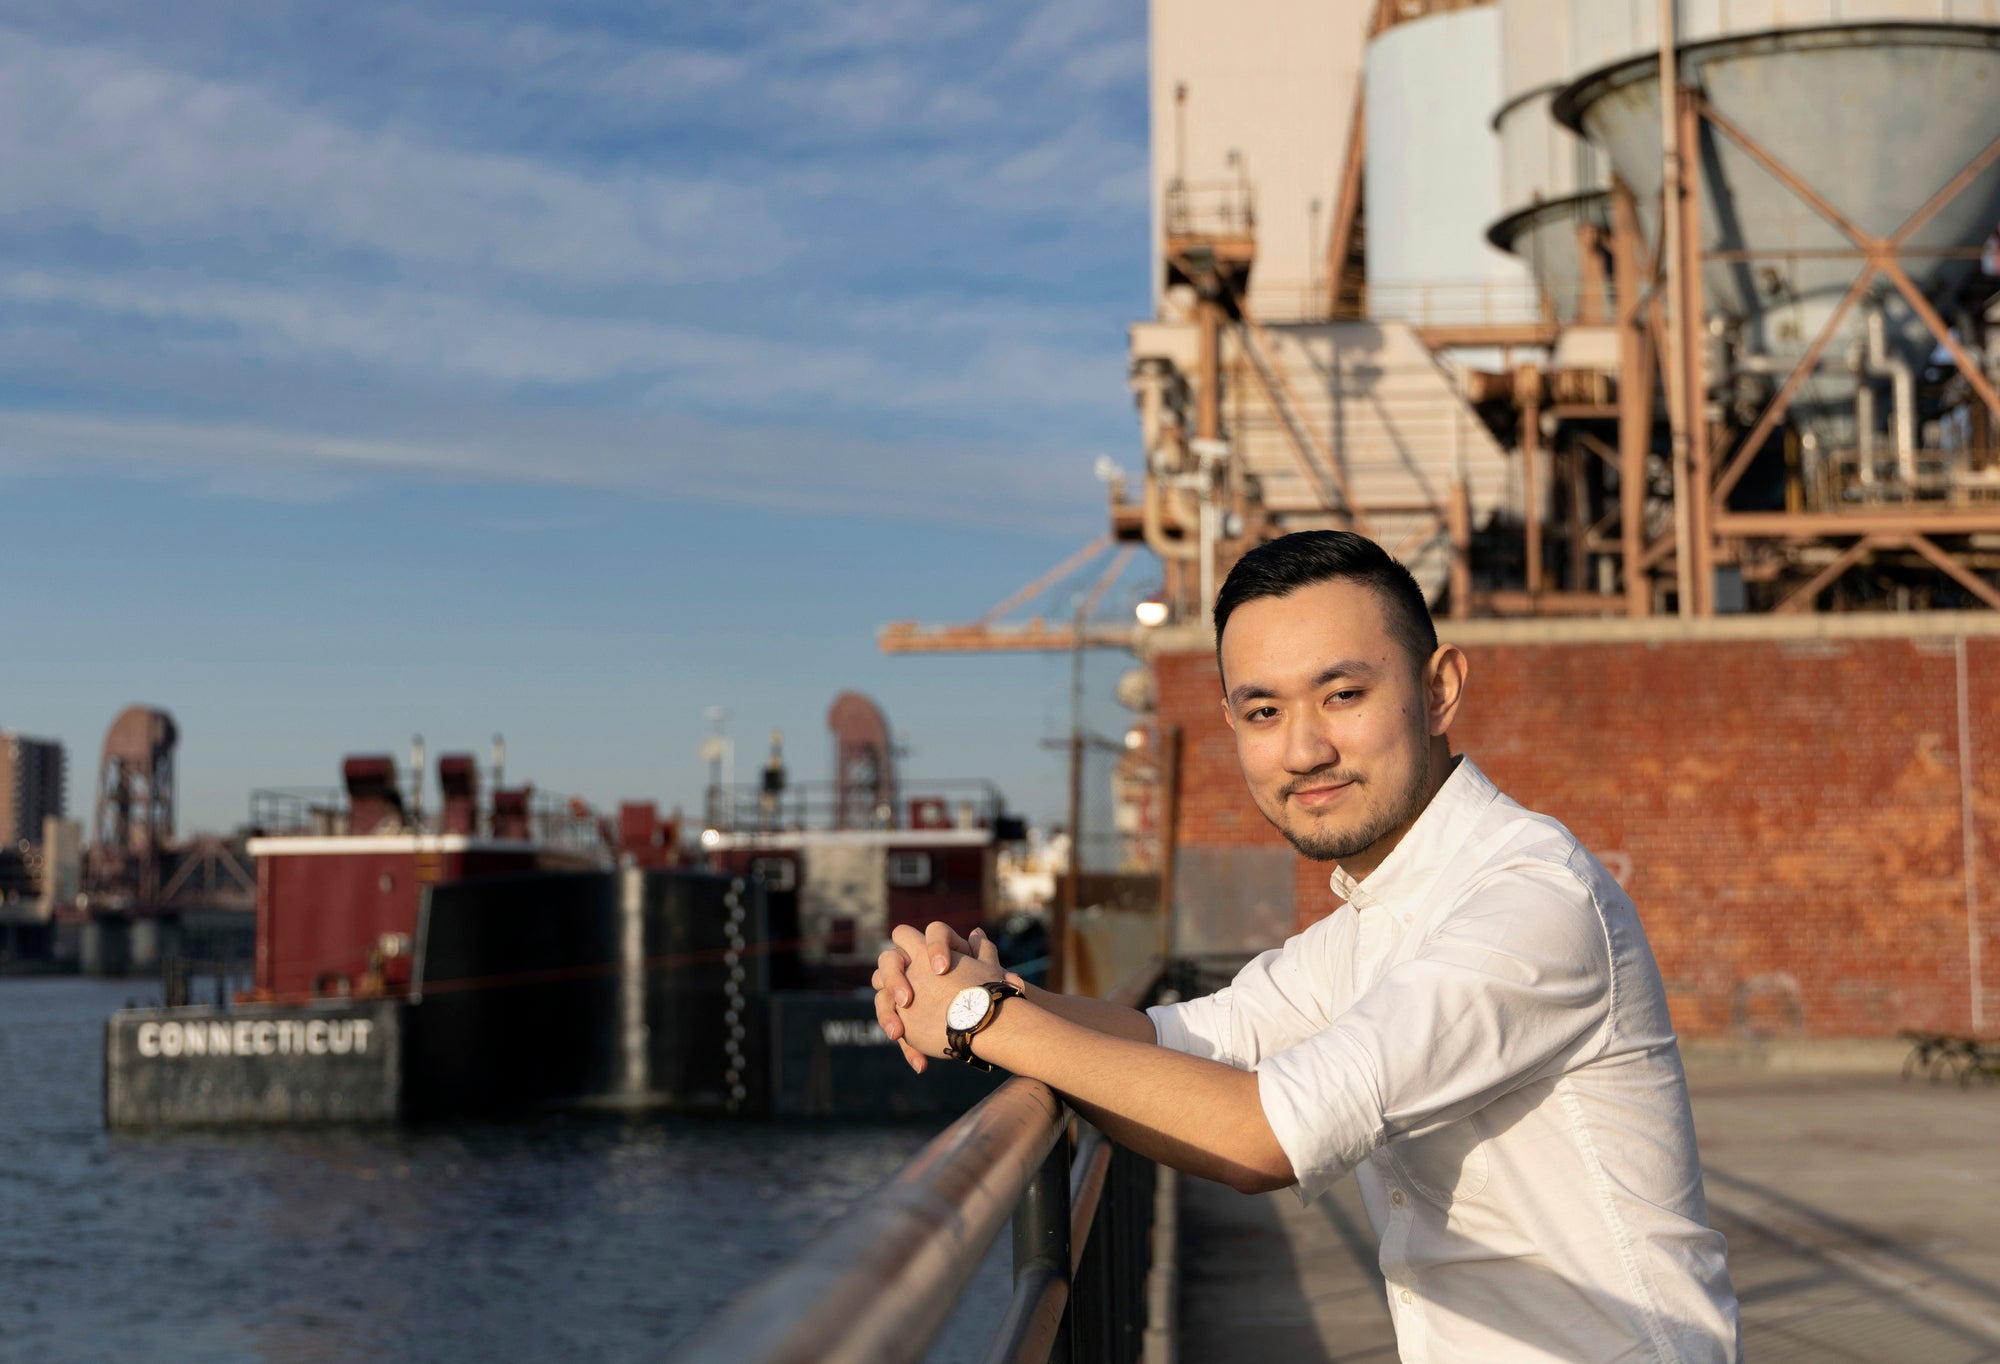 Daniel Chu, an energy planner for the NYC Environmental Justice Alliance, photographed in Queensbridge Park, next to the Ravenswood Generating Station in Queens, New York.